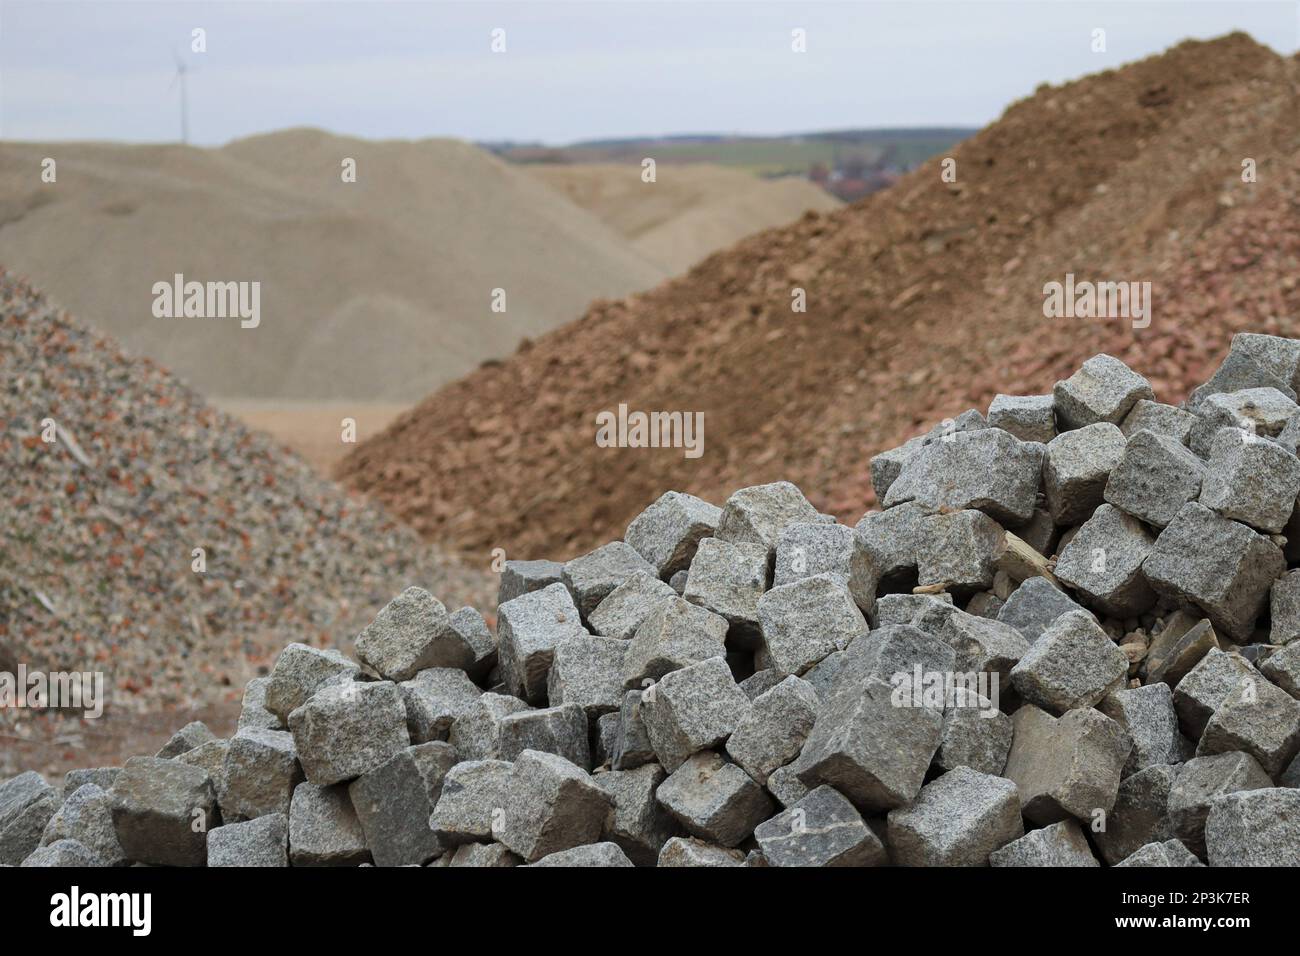 Cobblestones on a Landfill with all kinds of Rocks Stock Photo